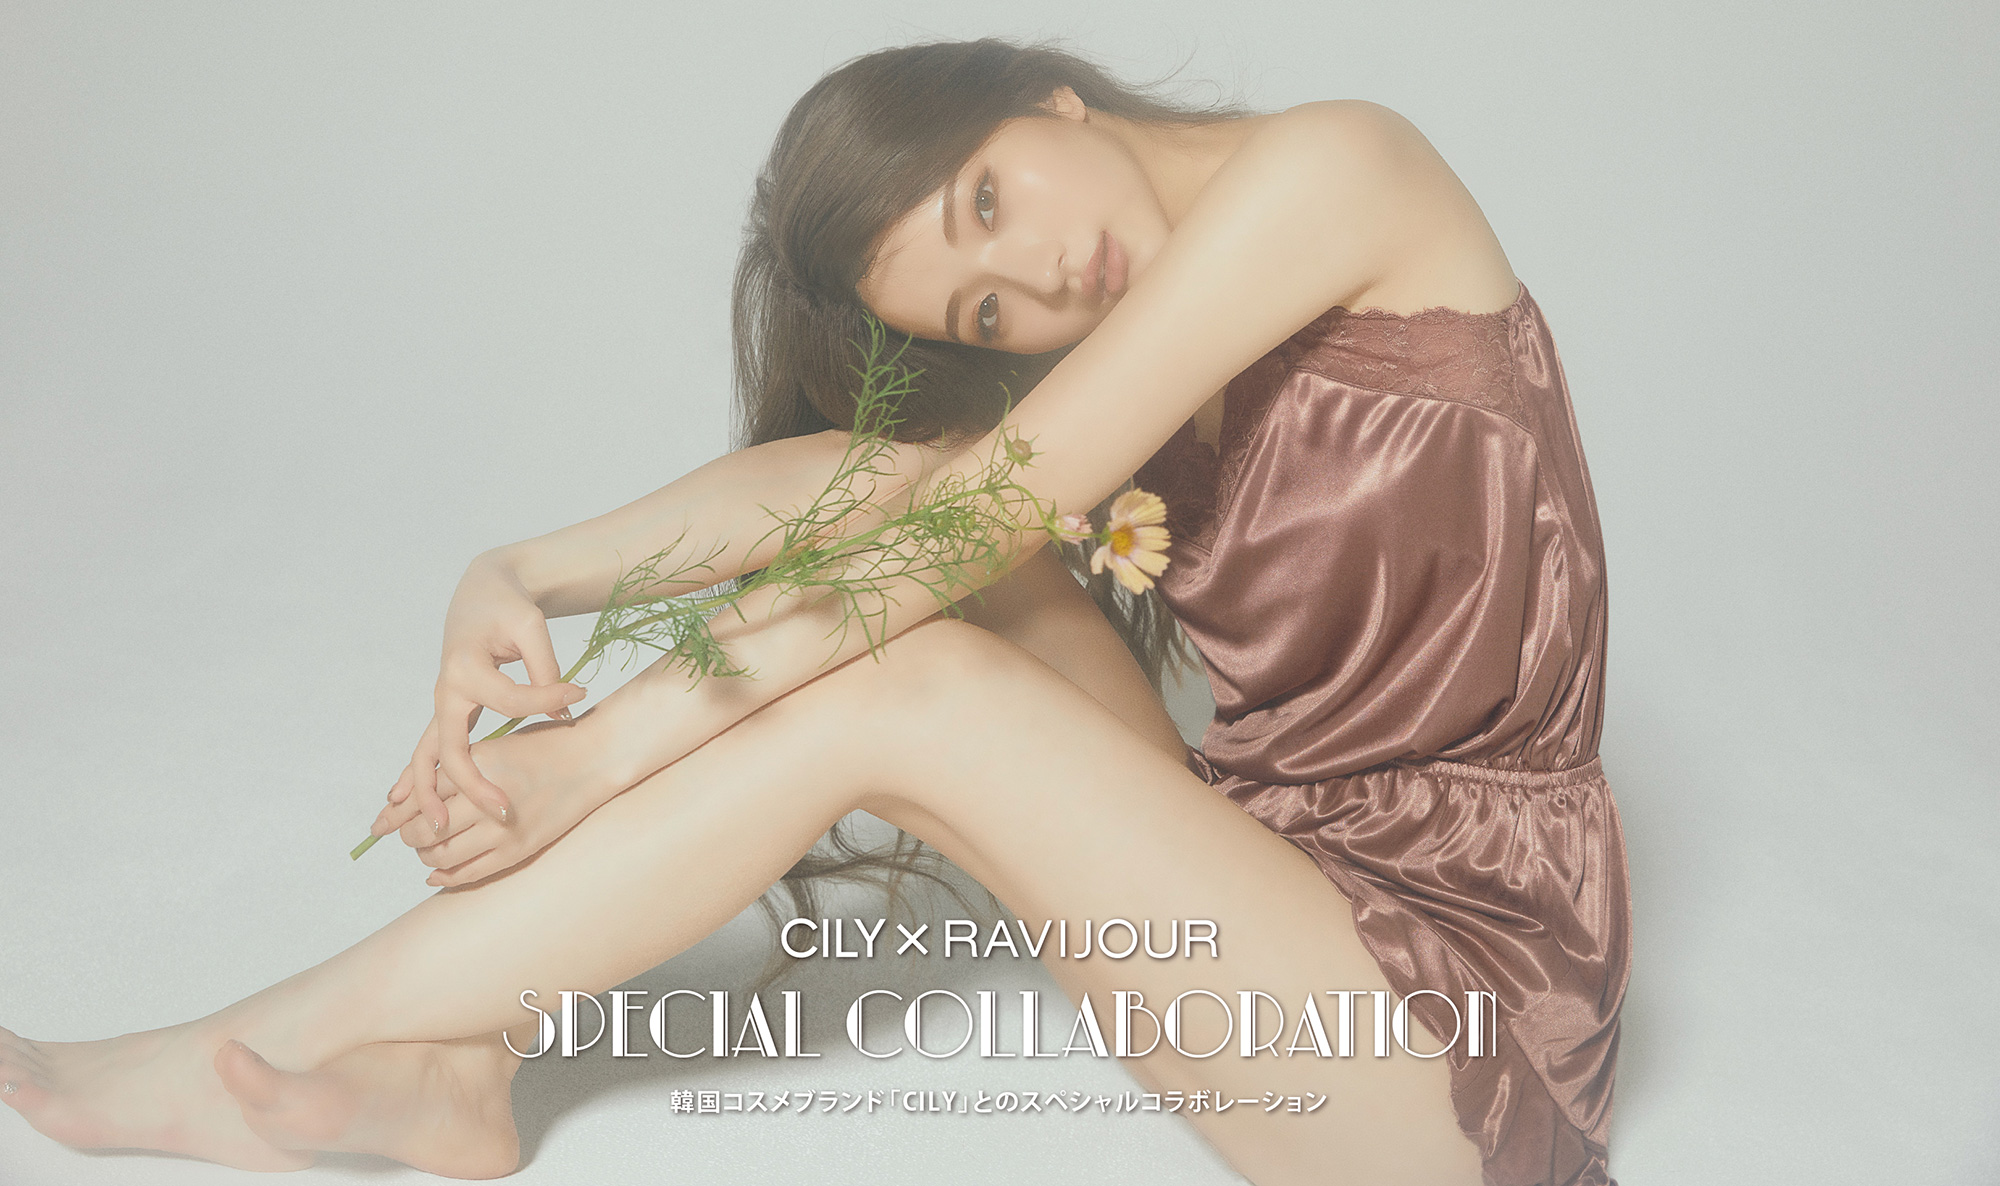 CILY × RAVIJOUR SPECIAL COLLABORATION